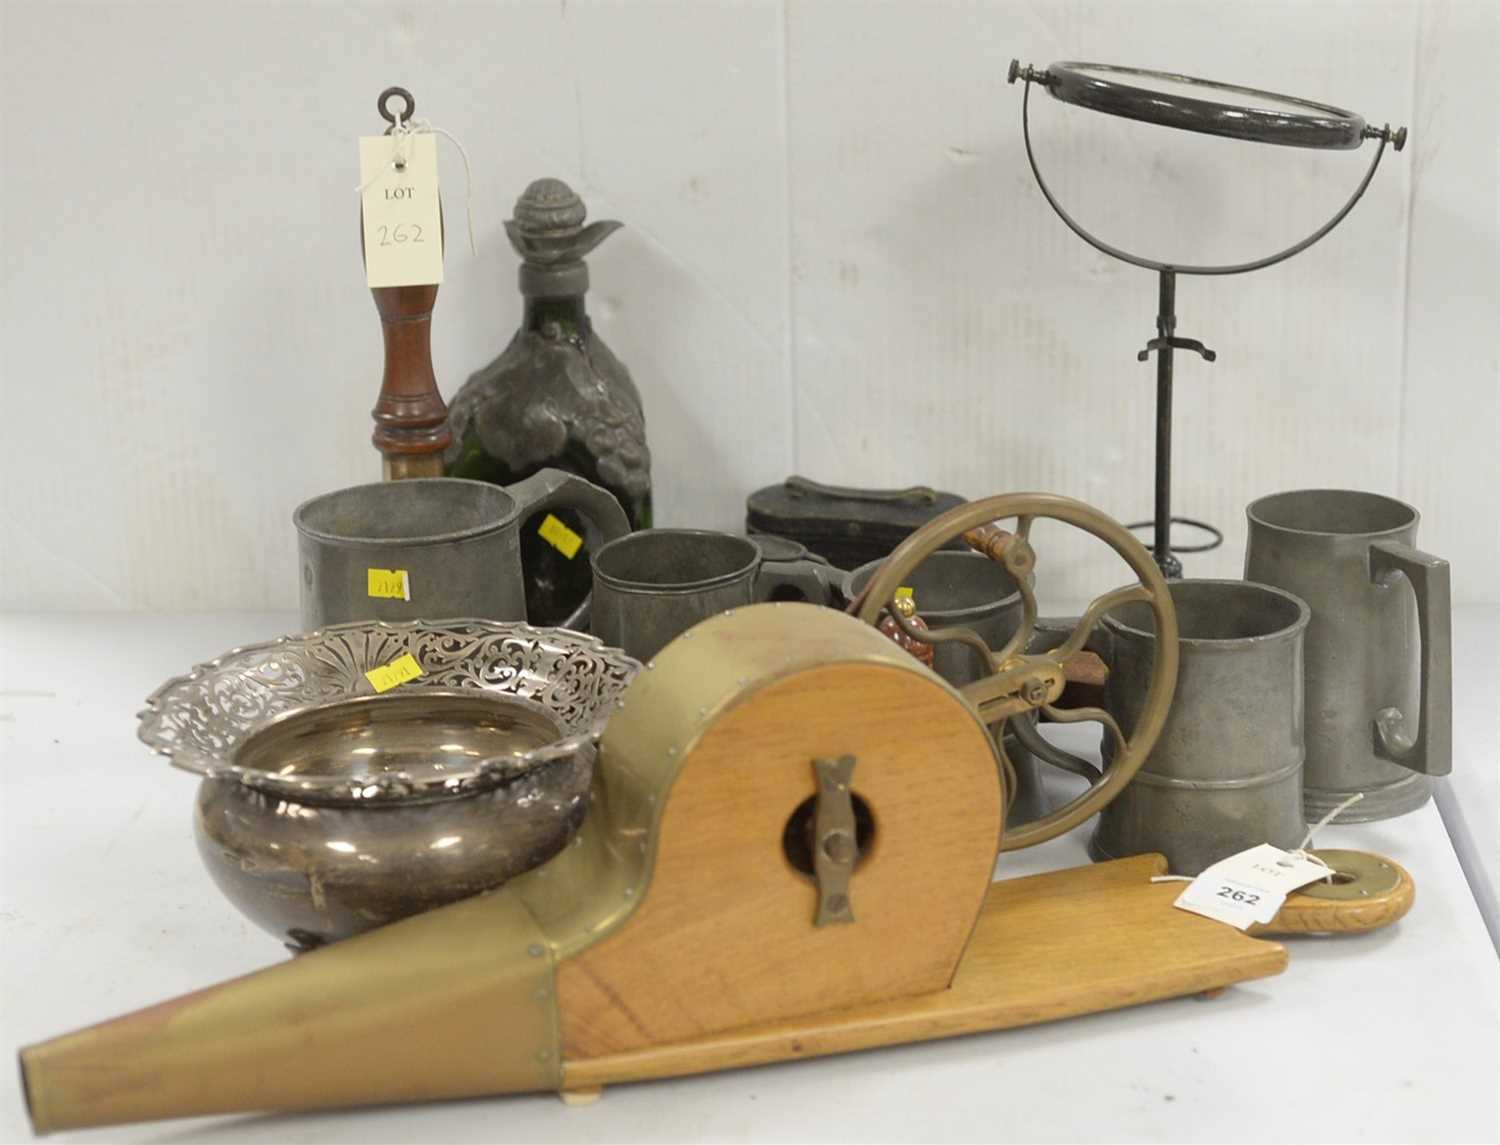 Lot 262 - Mechanical bellows and other items